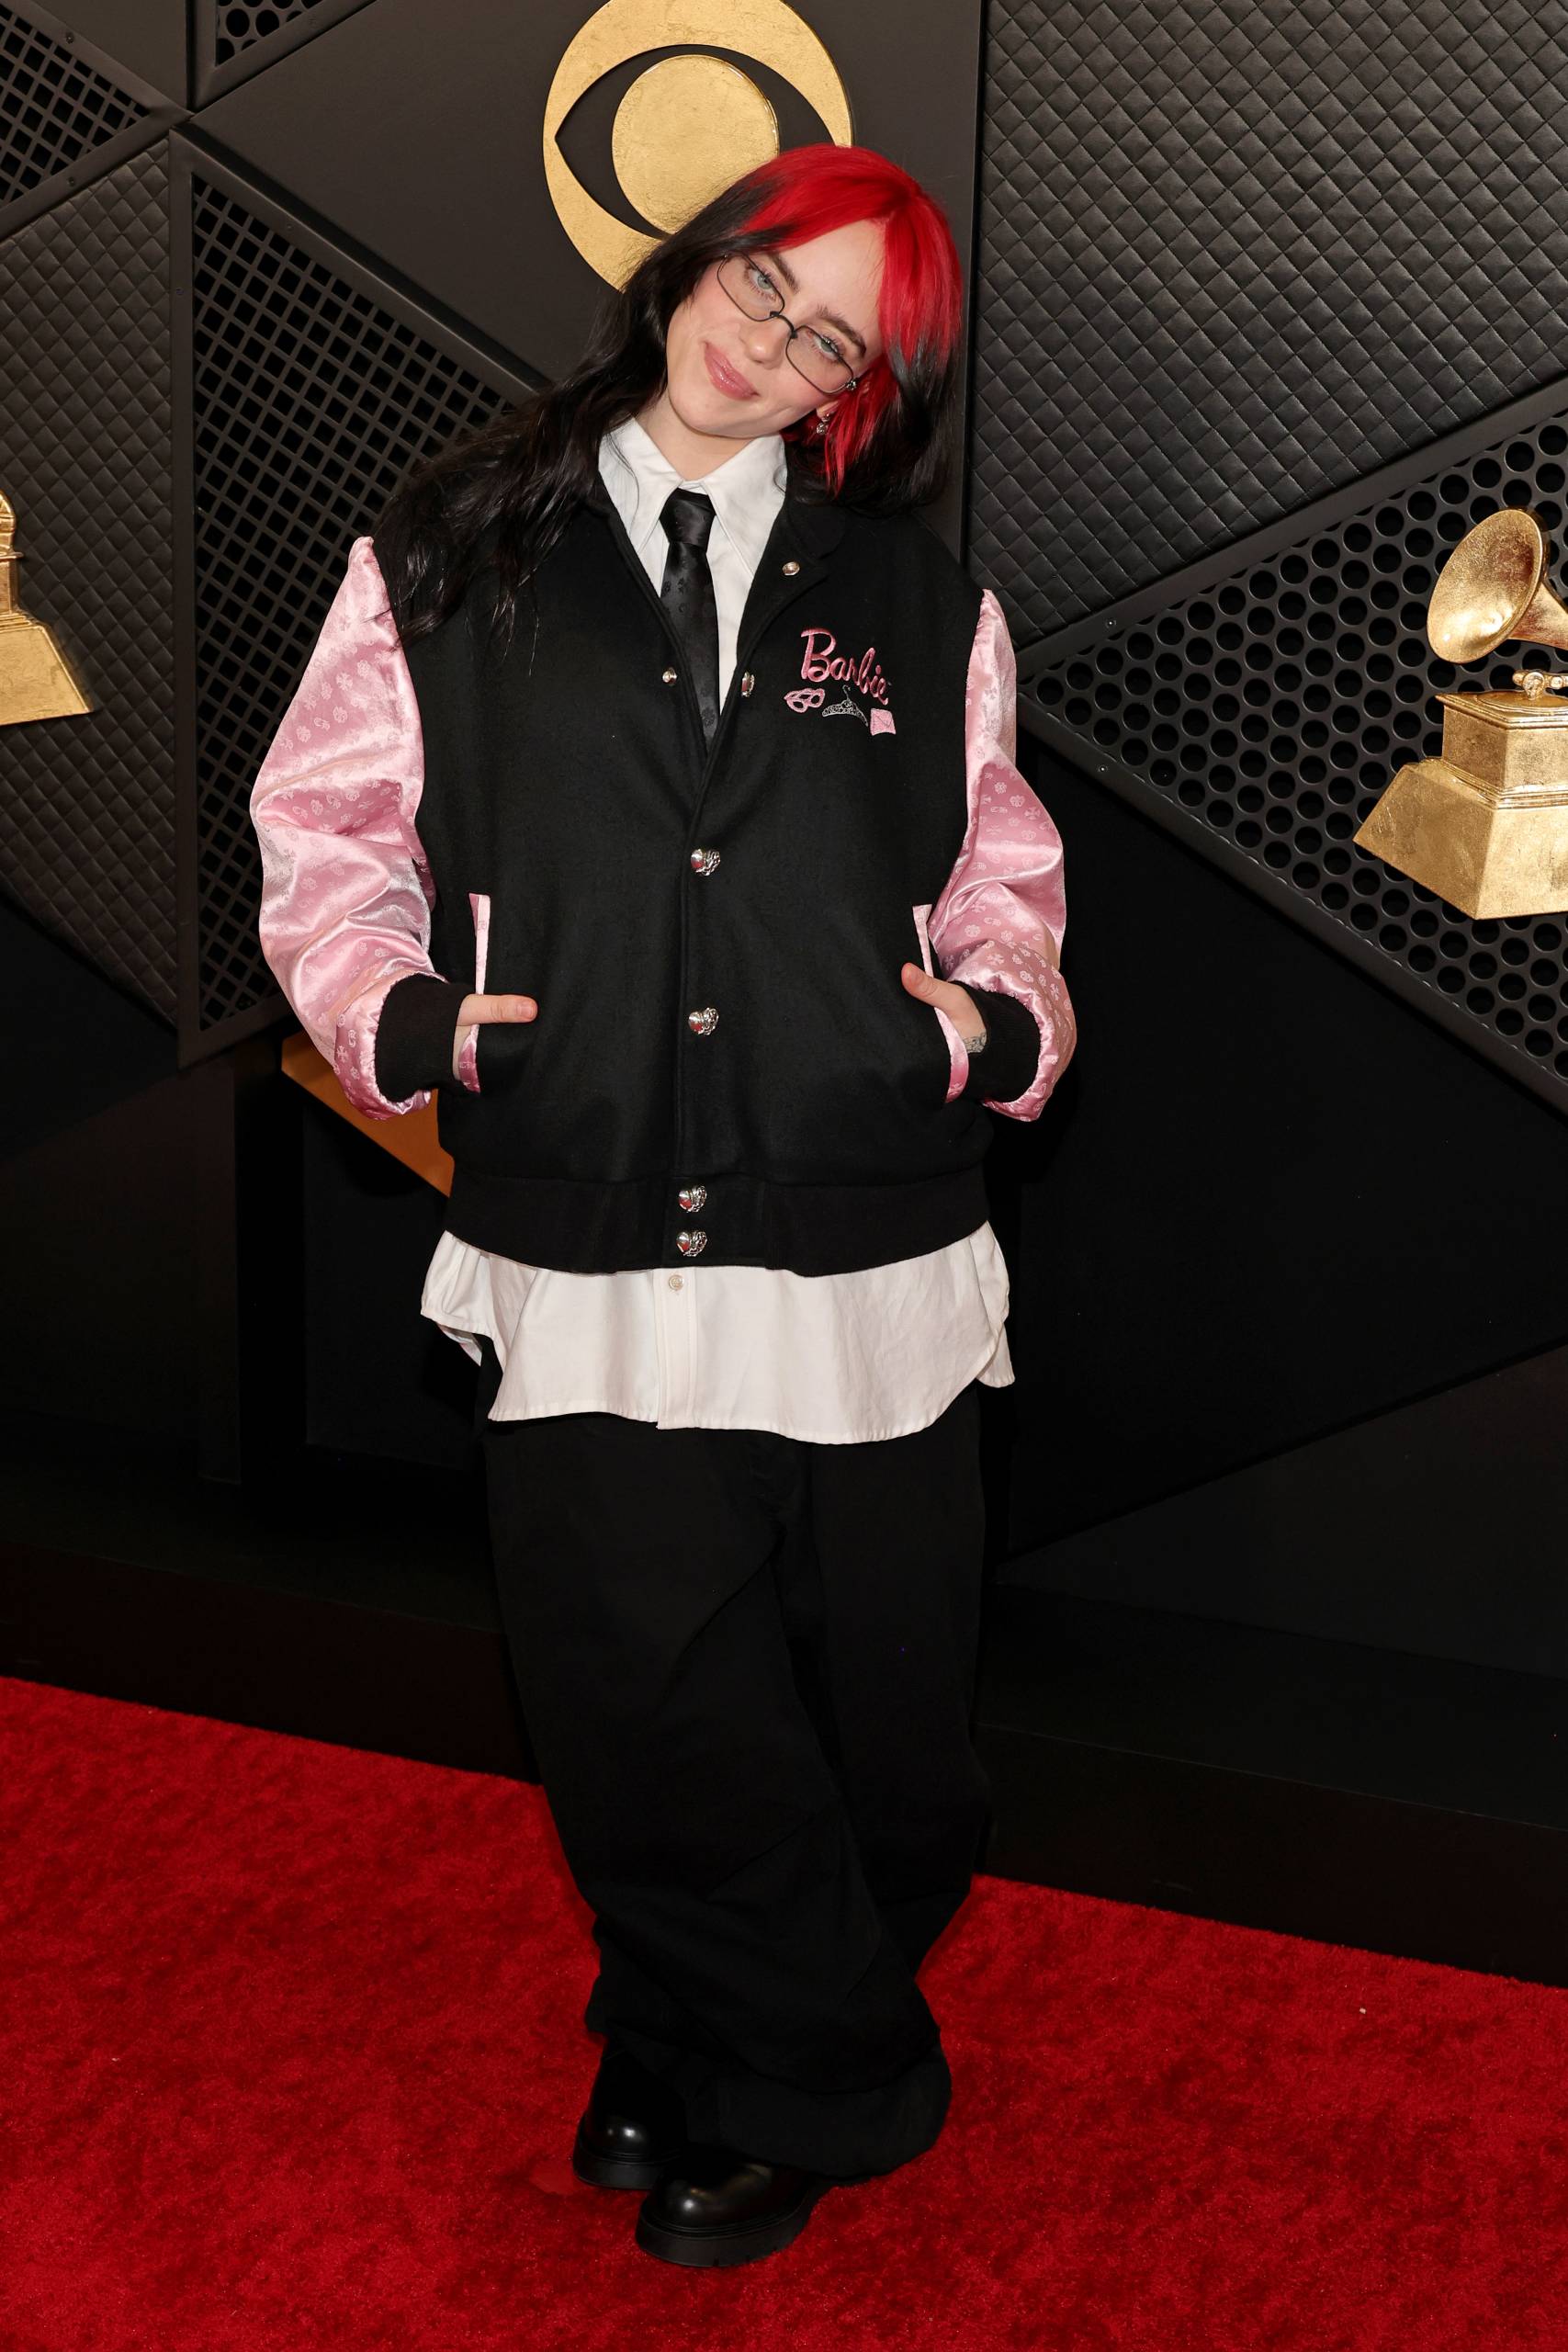 A young woman with red and black hair stands on the red carpet wearing oversized black pants and a bomber jacket.